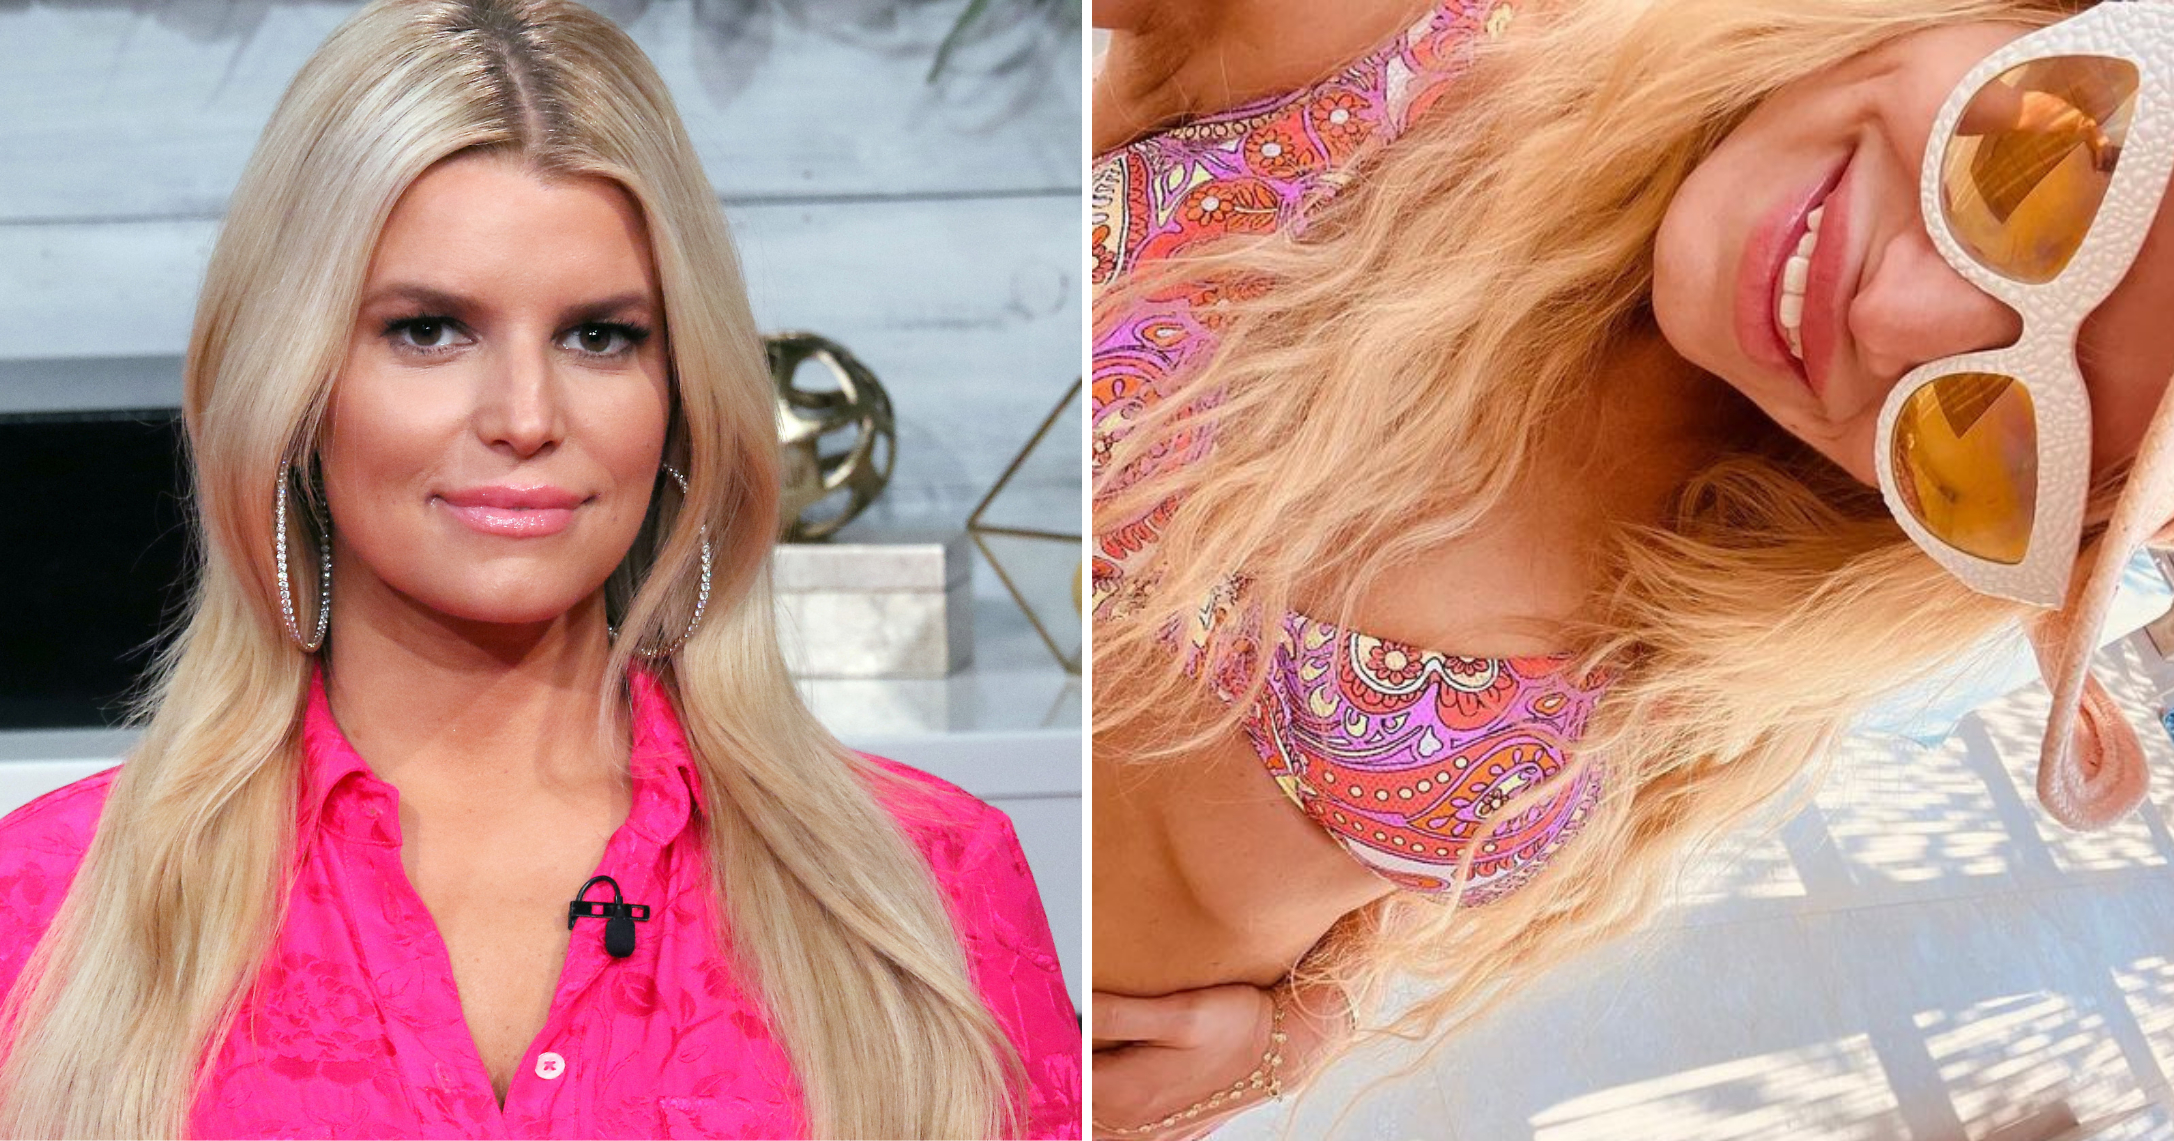 Pregnant Belly? Jessica Simpson Shows Off Bikini Body With Husband